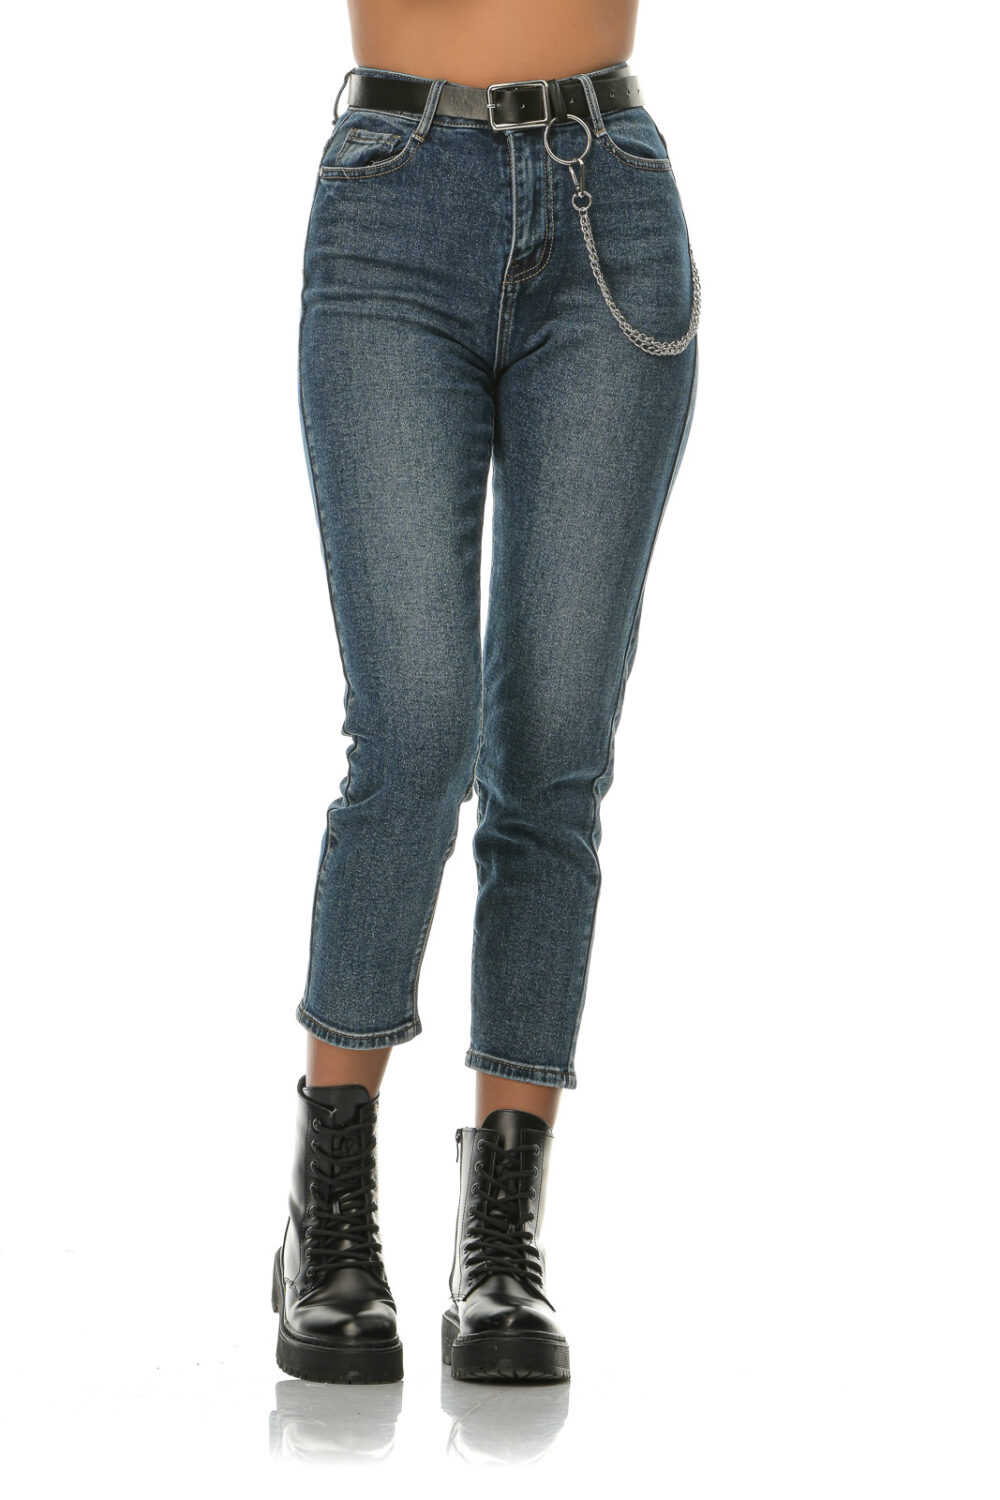 Blue high-waisted jeans wide with black belt and detachable chain